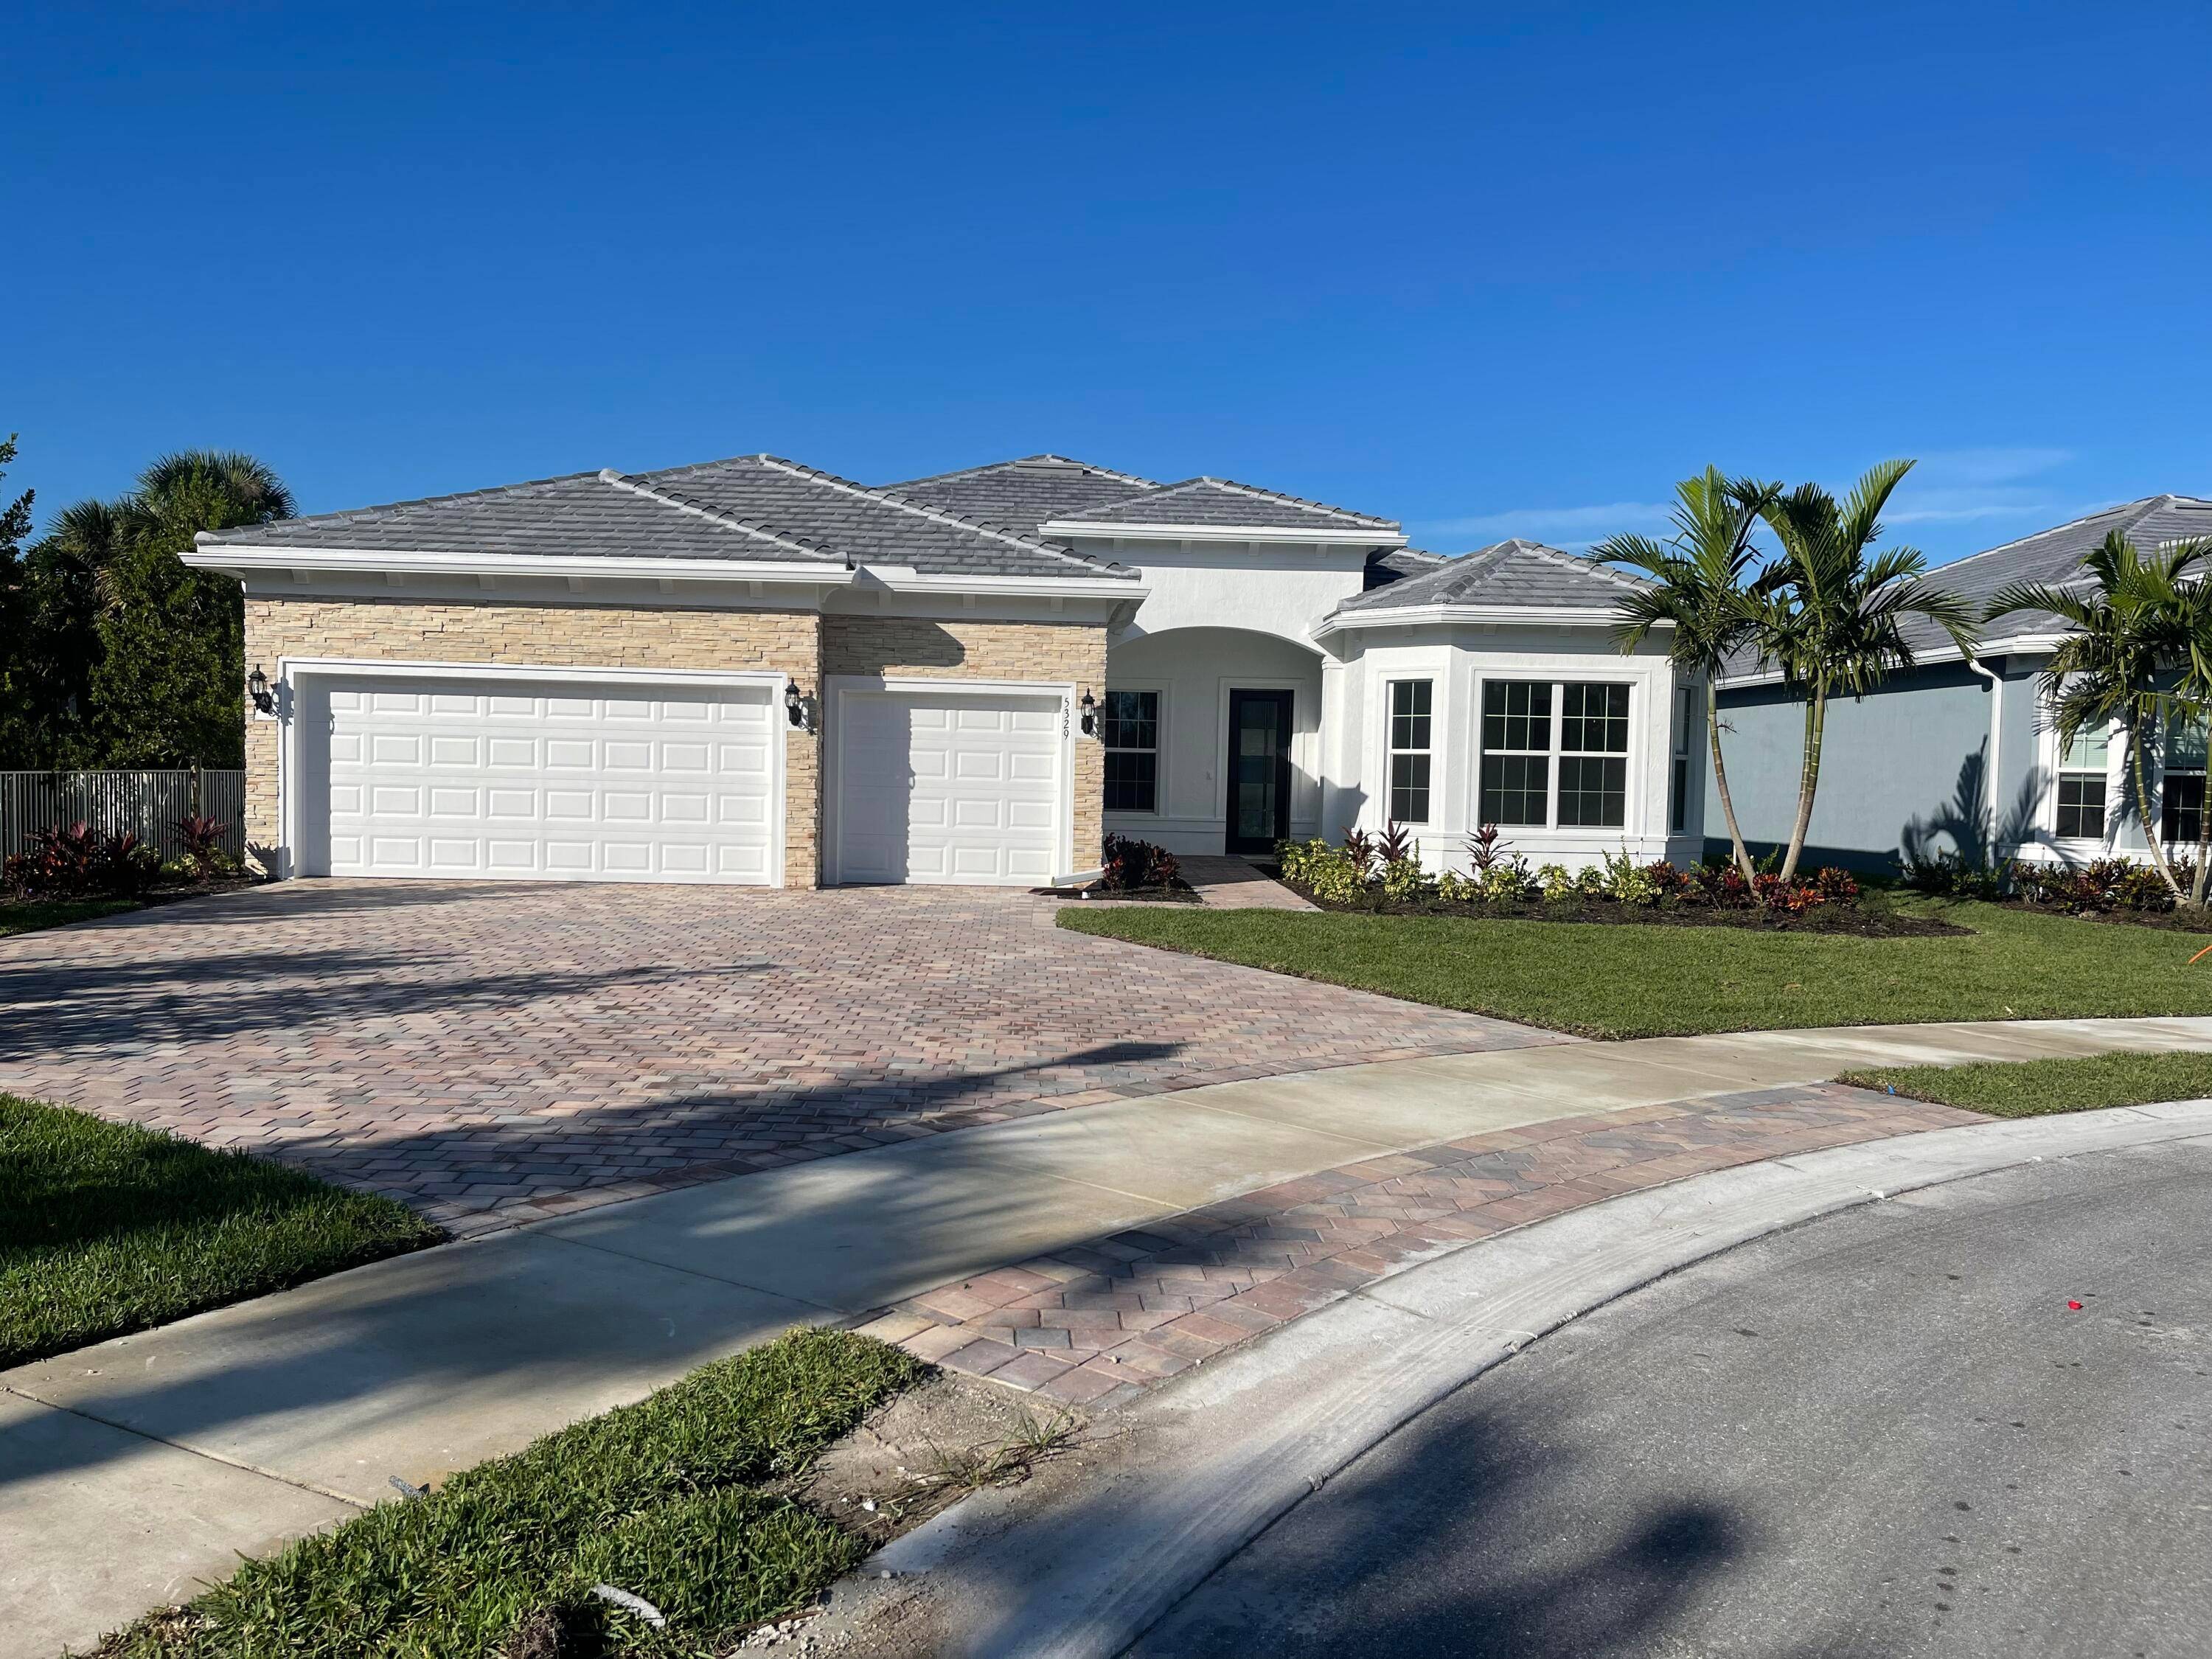 Experience luxury living in Windsong Estates, gated community in Lake Worth, designed with a focus on contemporary comfort and convenience.